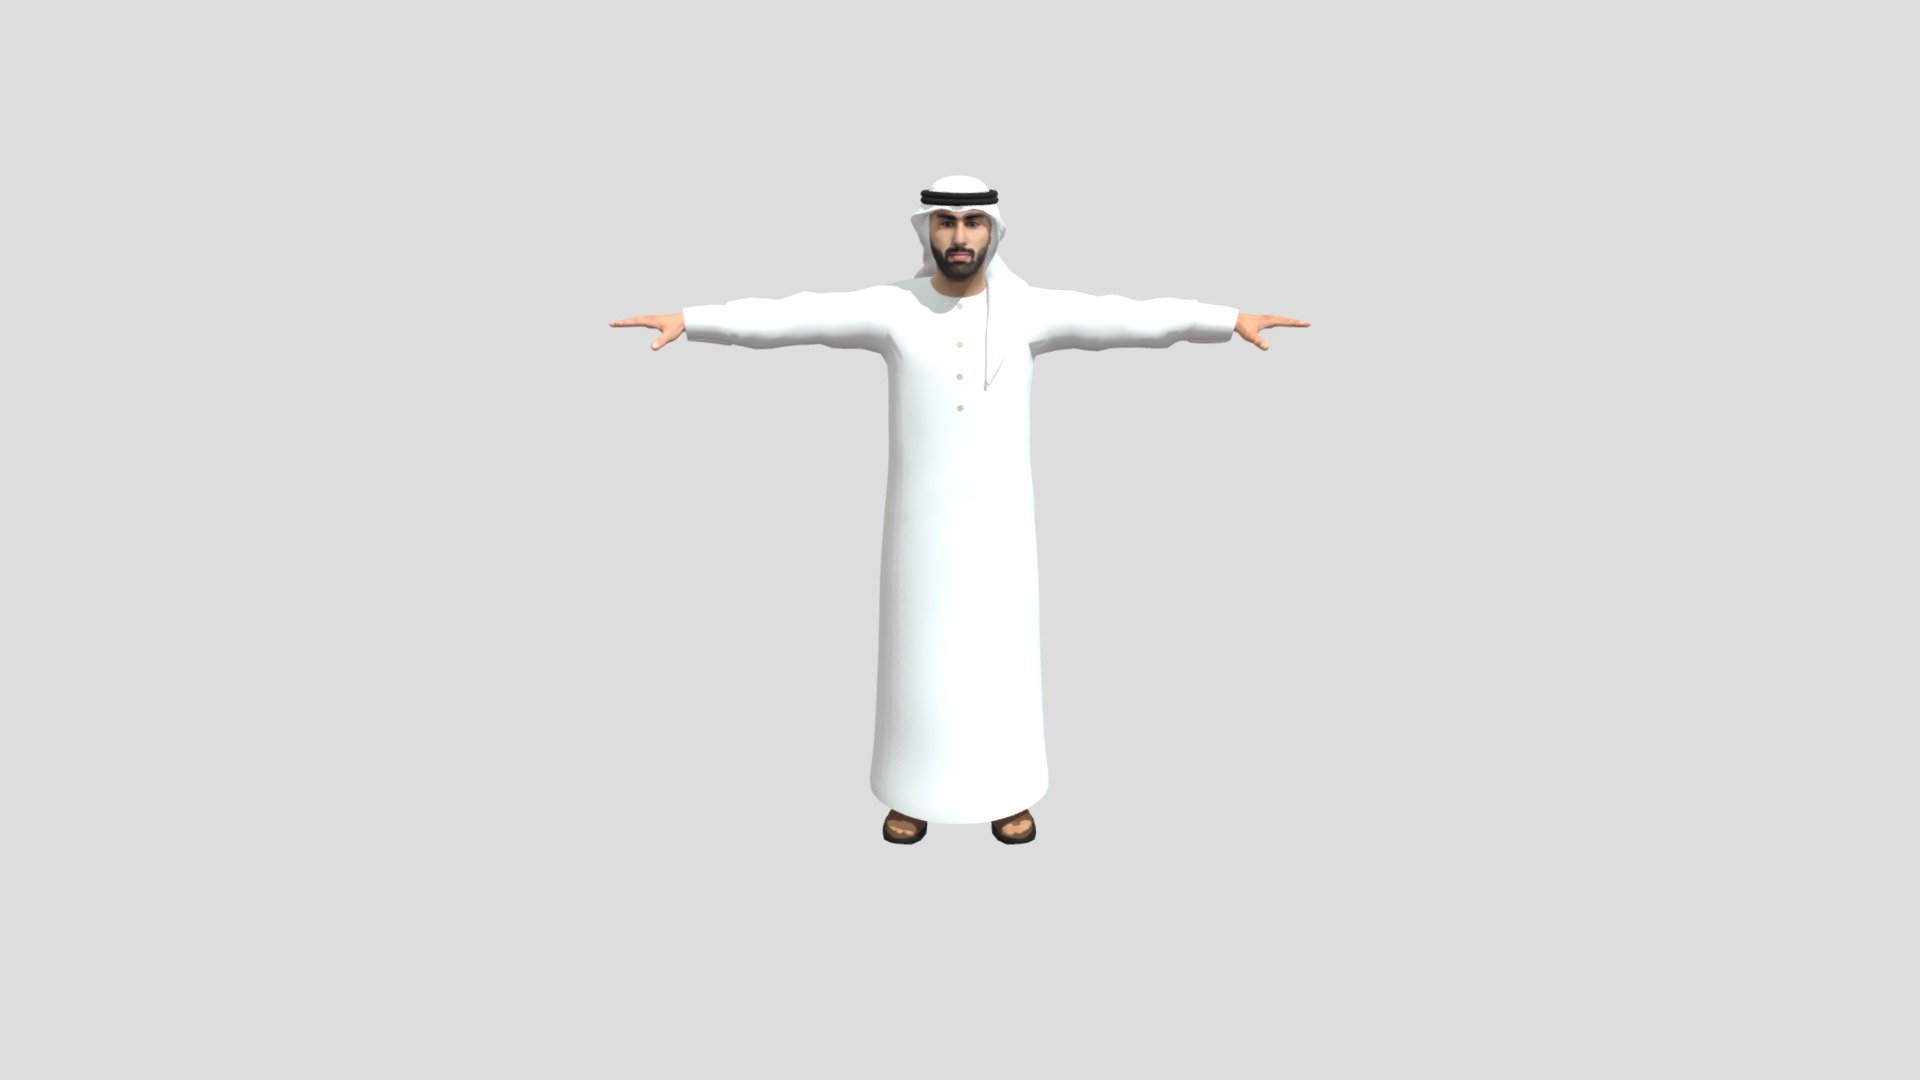 Emarati Male in Local Dress (FBX) - Fully Rigged with Facial Expressions Blendshapes - Emarati Male in Local Dress (Rigged+Expressions) - Buy Royalty Free 3D model by XtremeZero 3d model